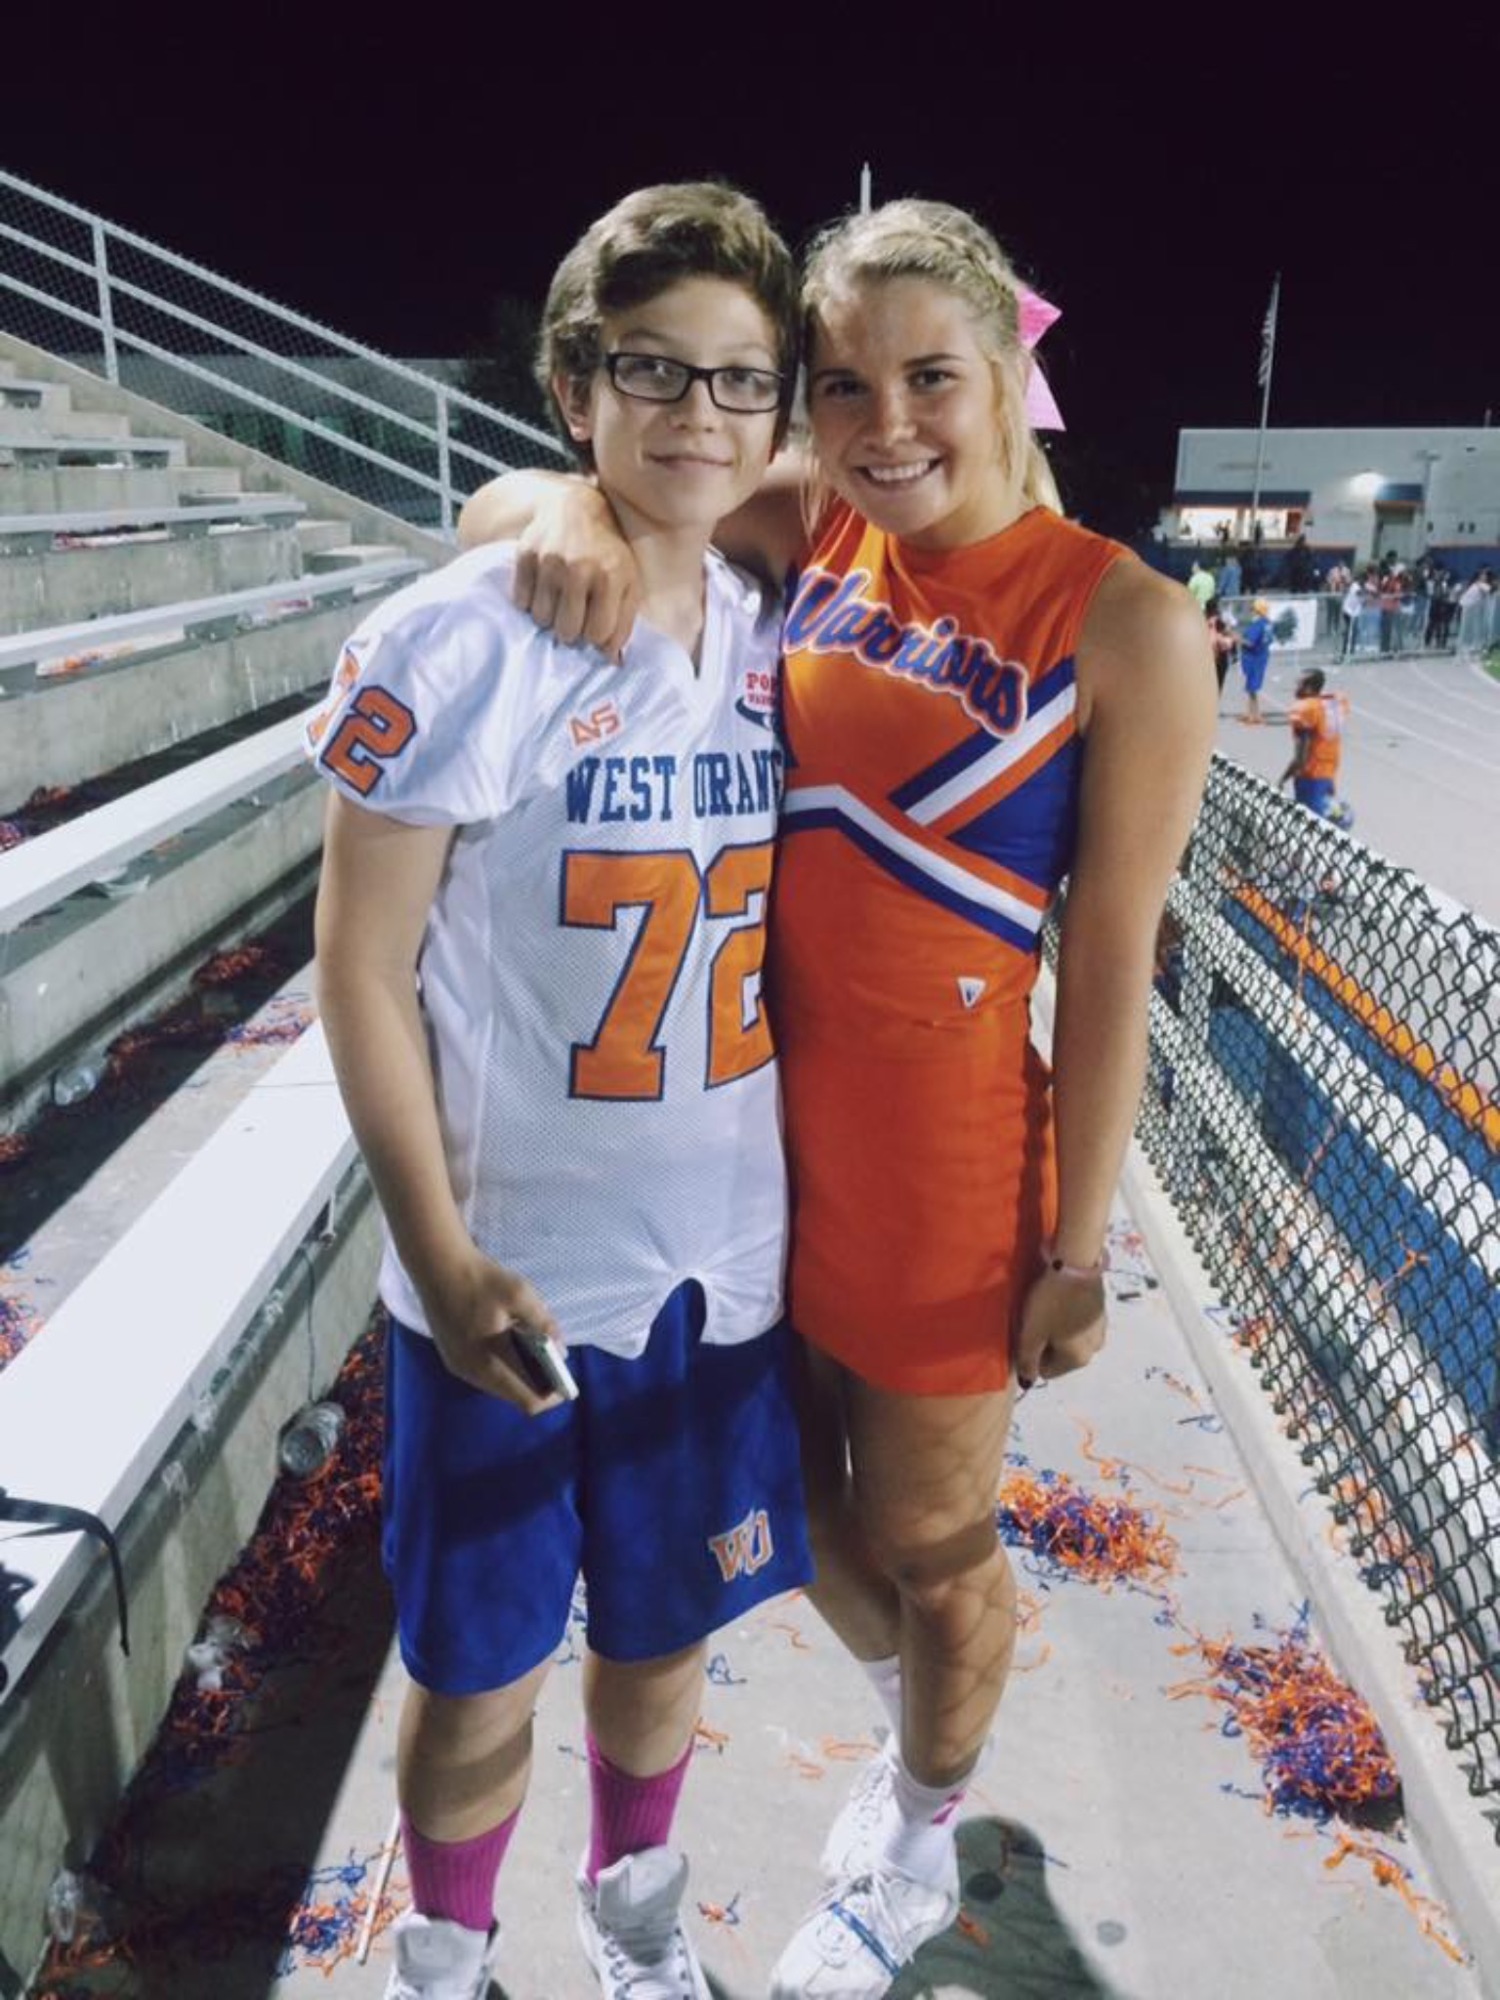 Brandon Paulikas and his sister, Alyssa, share a moment at the West Orange High stadium before his diagnosis.